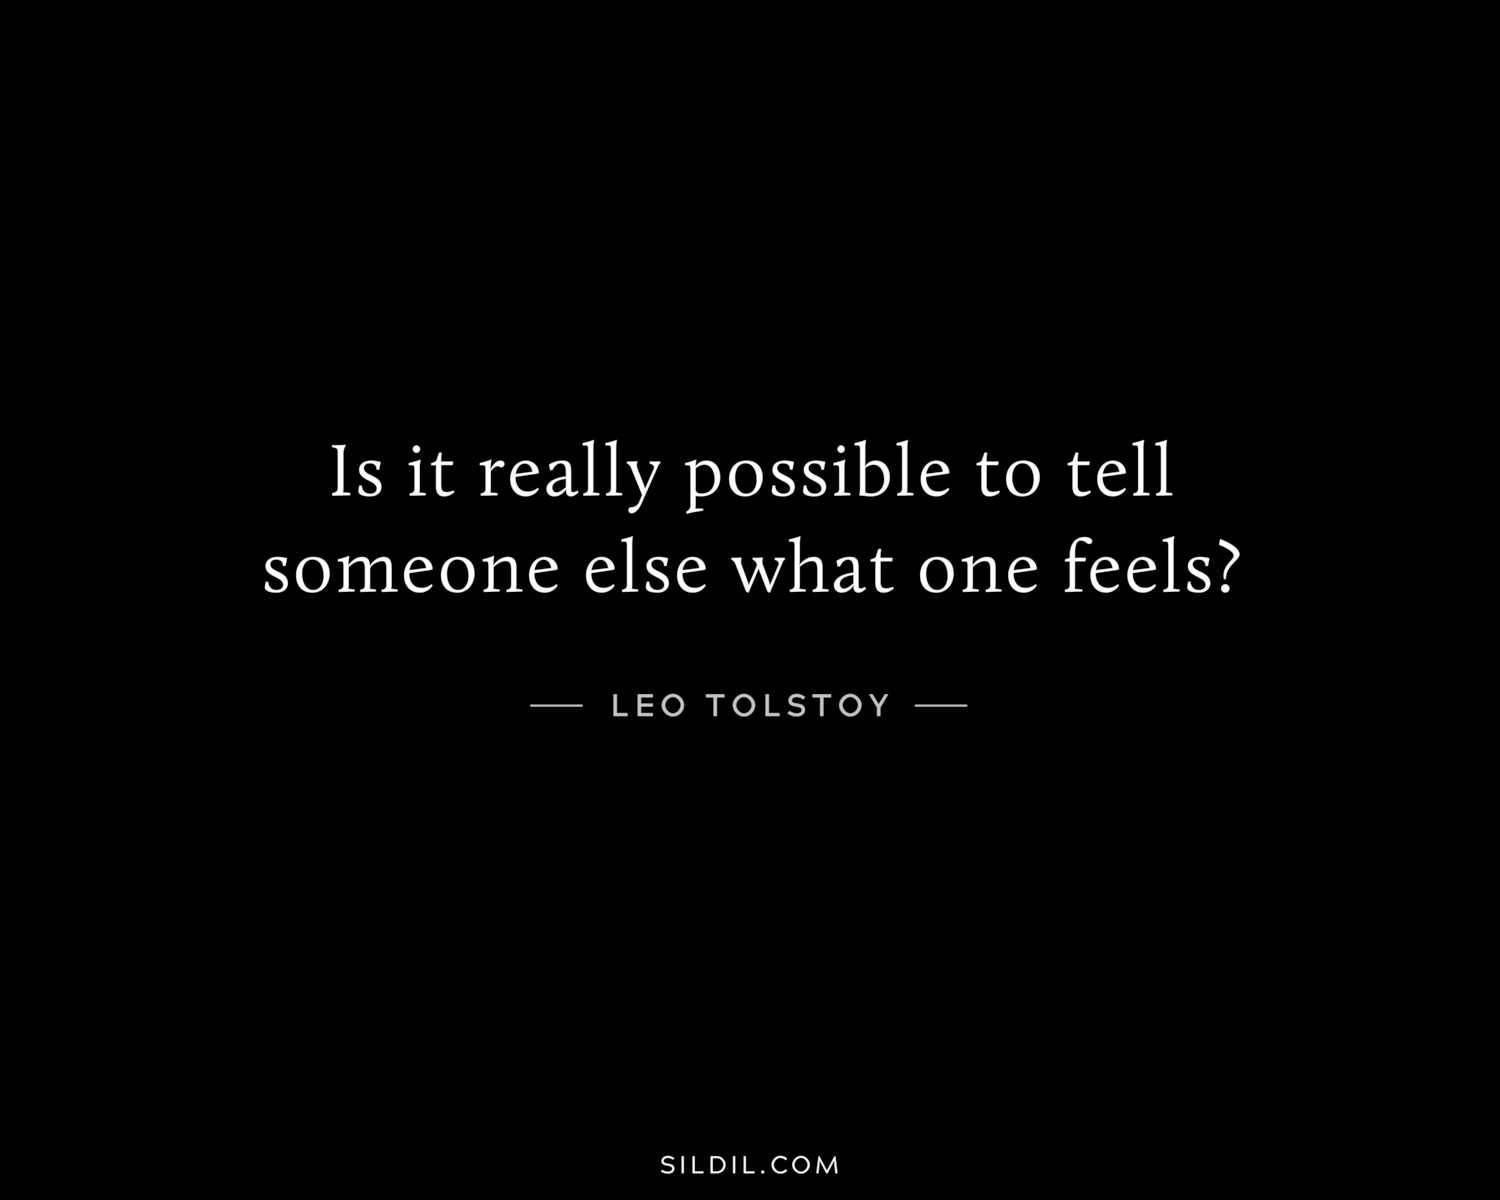 Is it really possible to tell someone else what one feels?